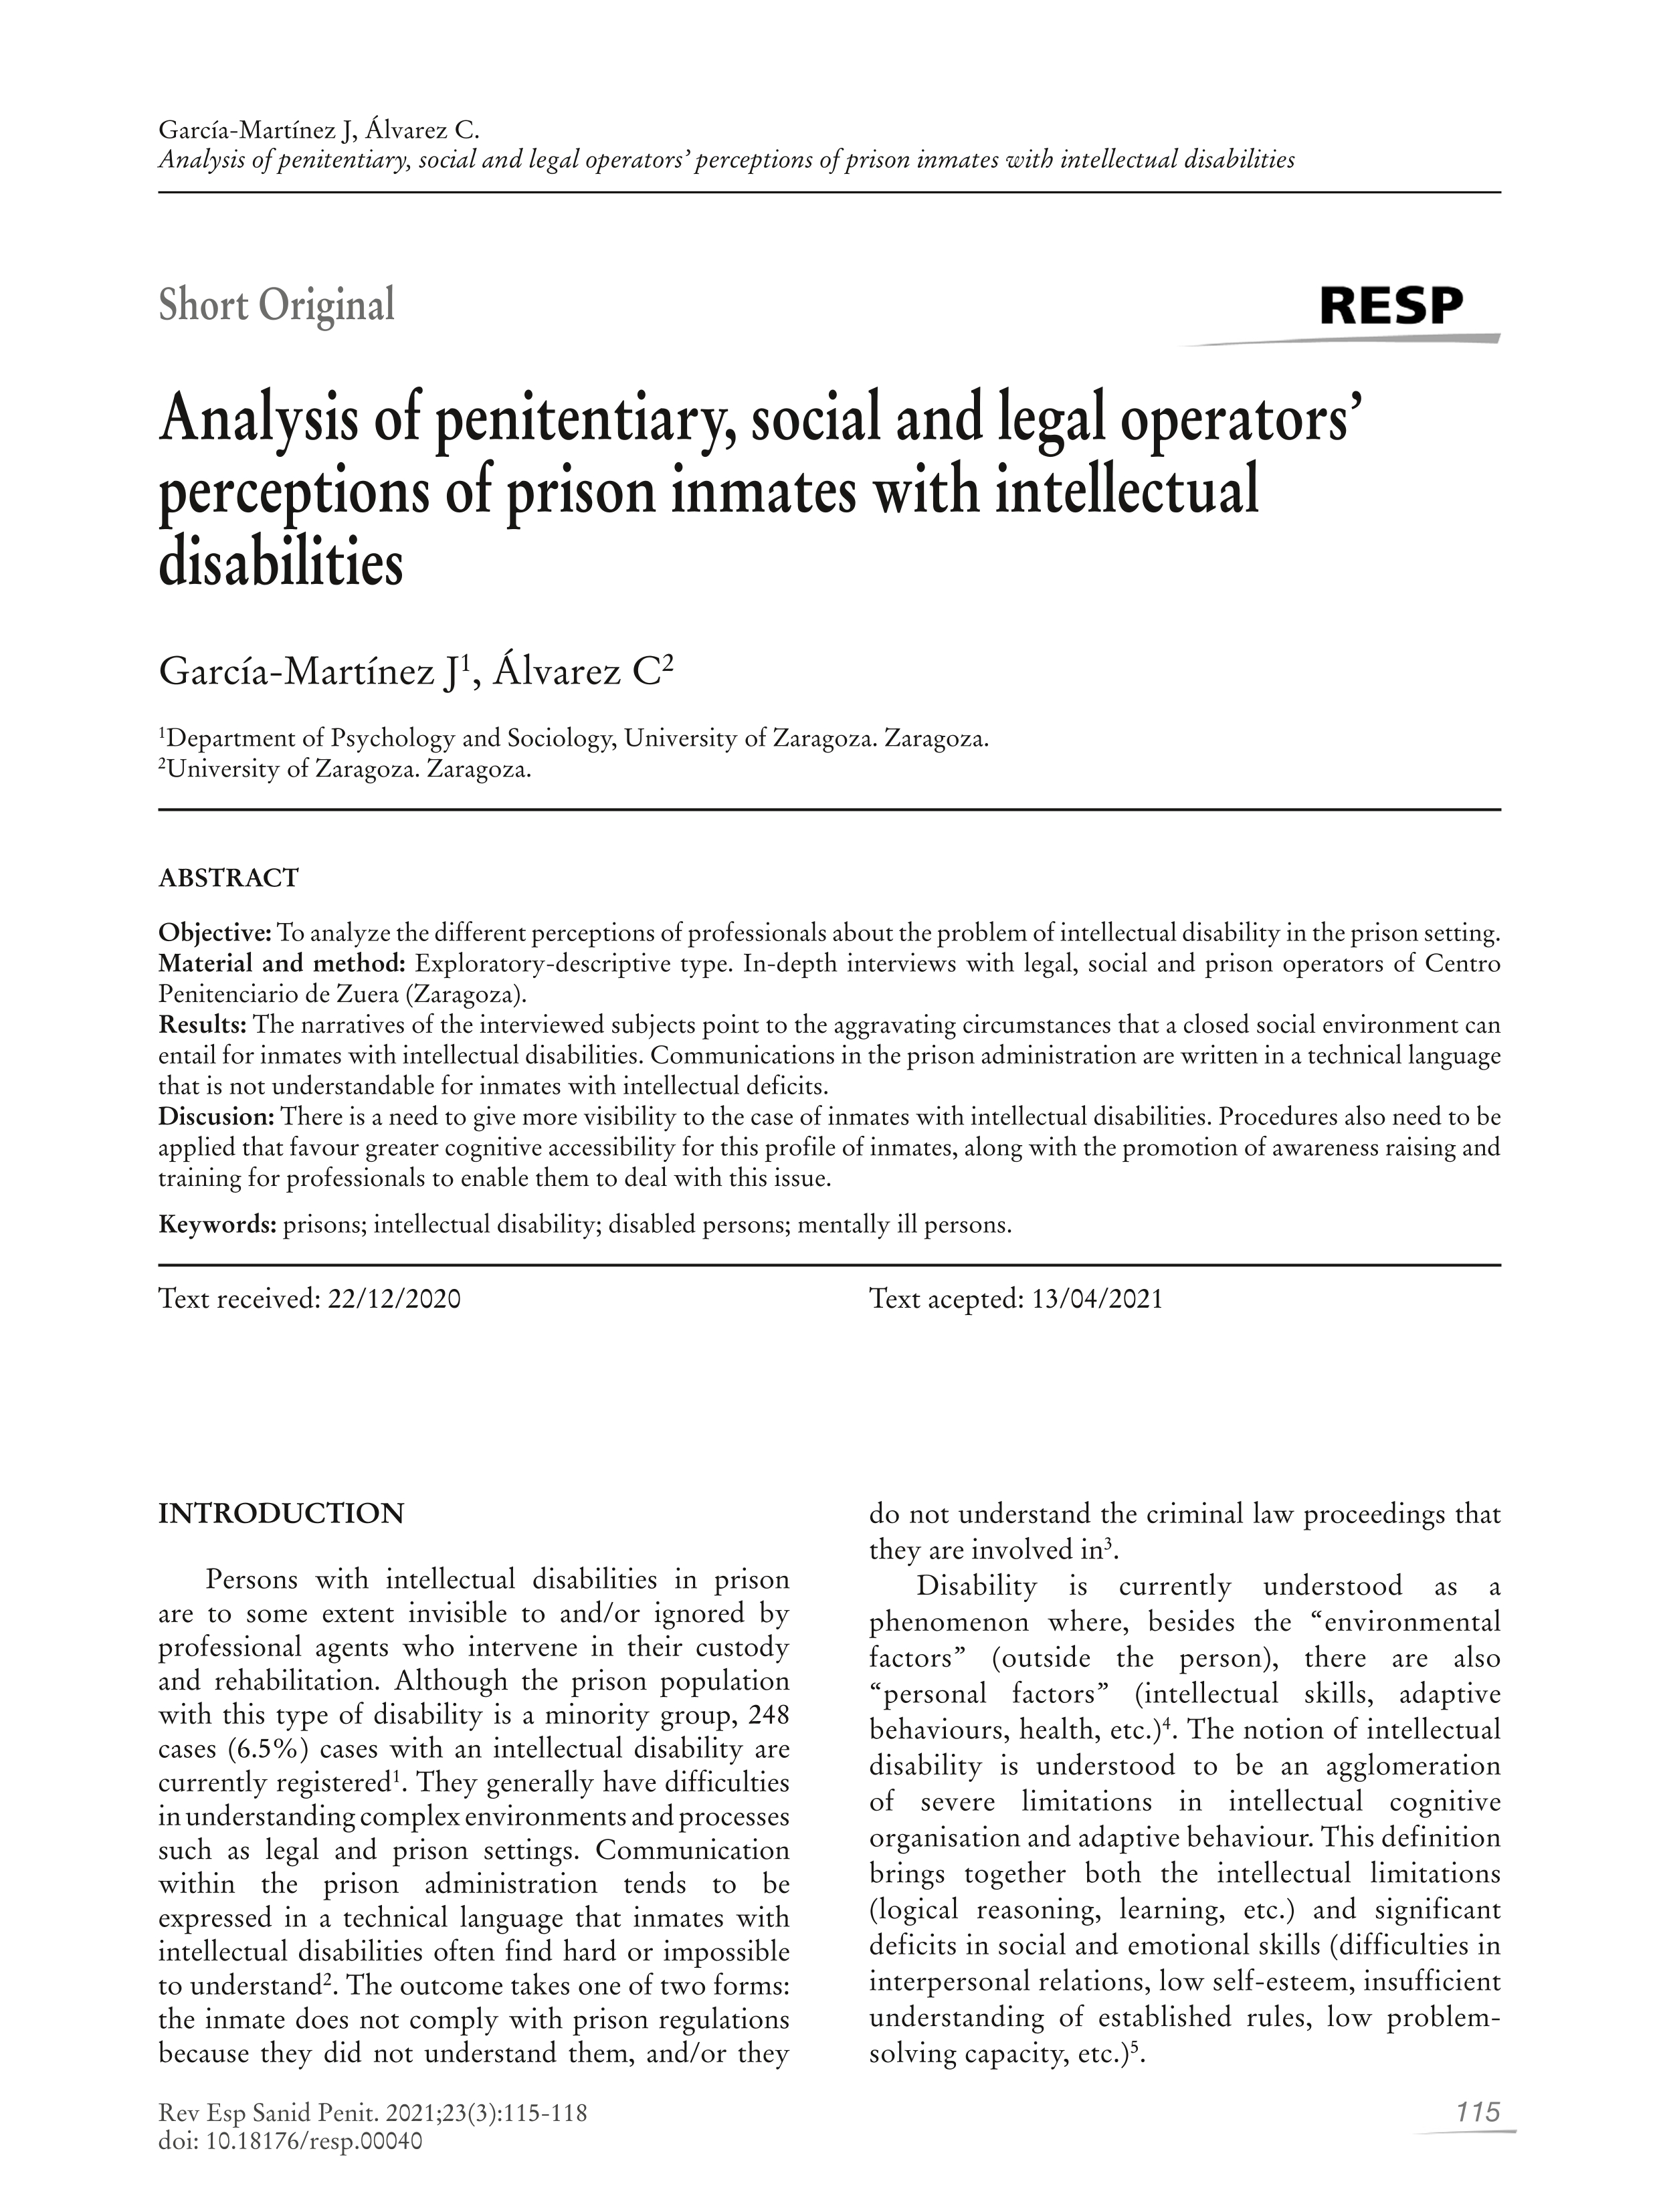 Analysis of penitentiary, social and legal operators’ perceptions of prison inmates with intellectual disabilities